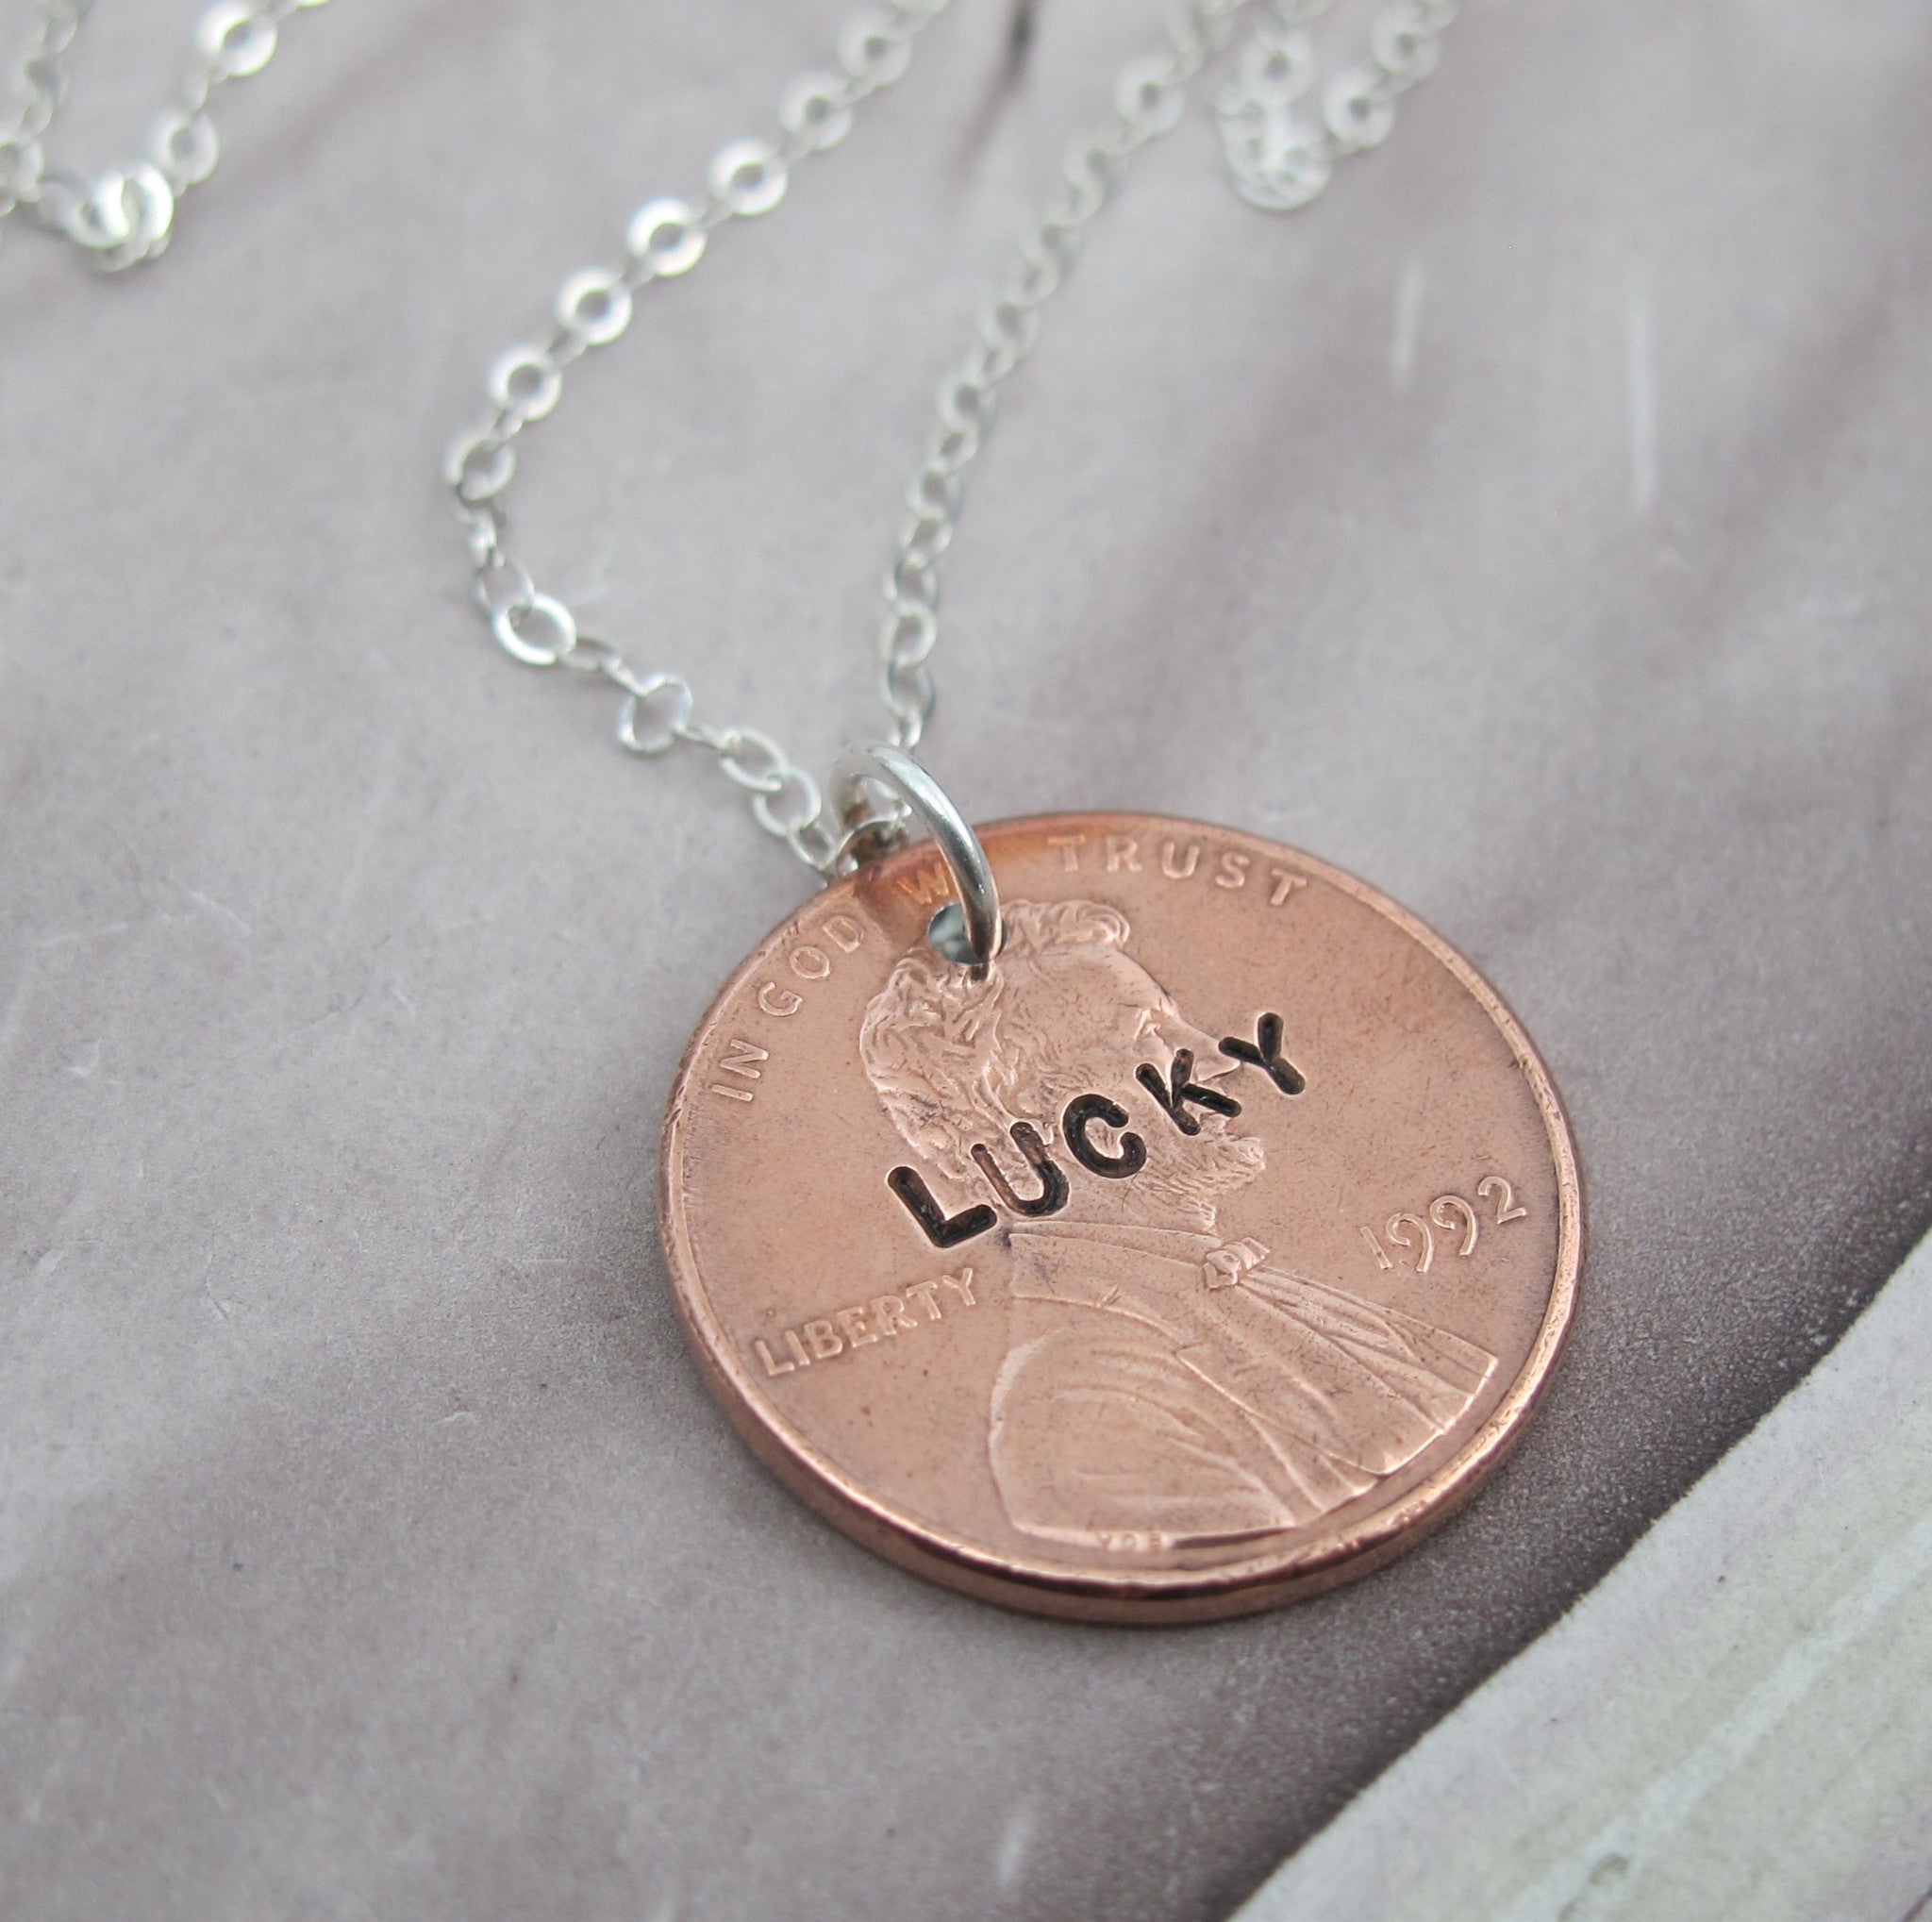 Lucky Stamped Pennies!